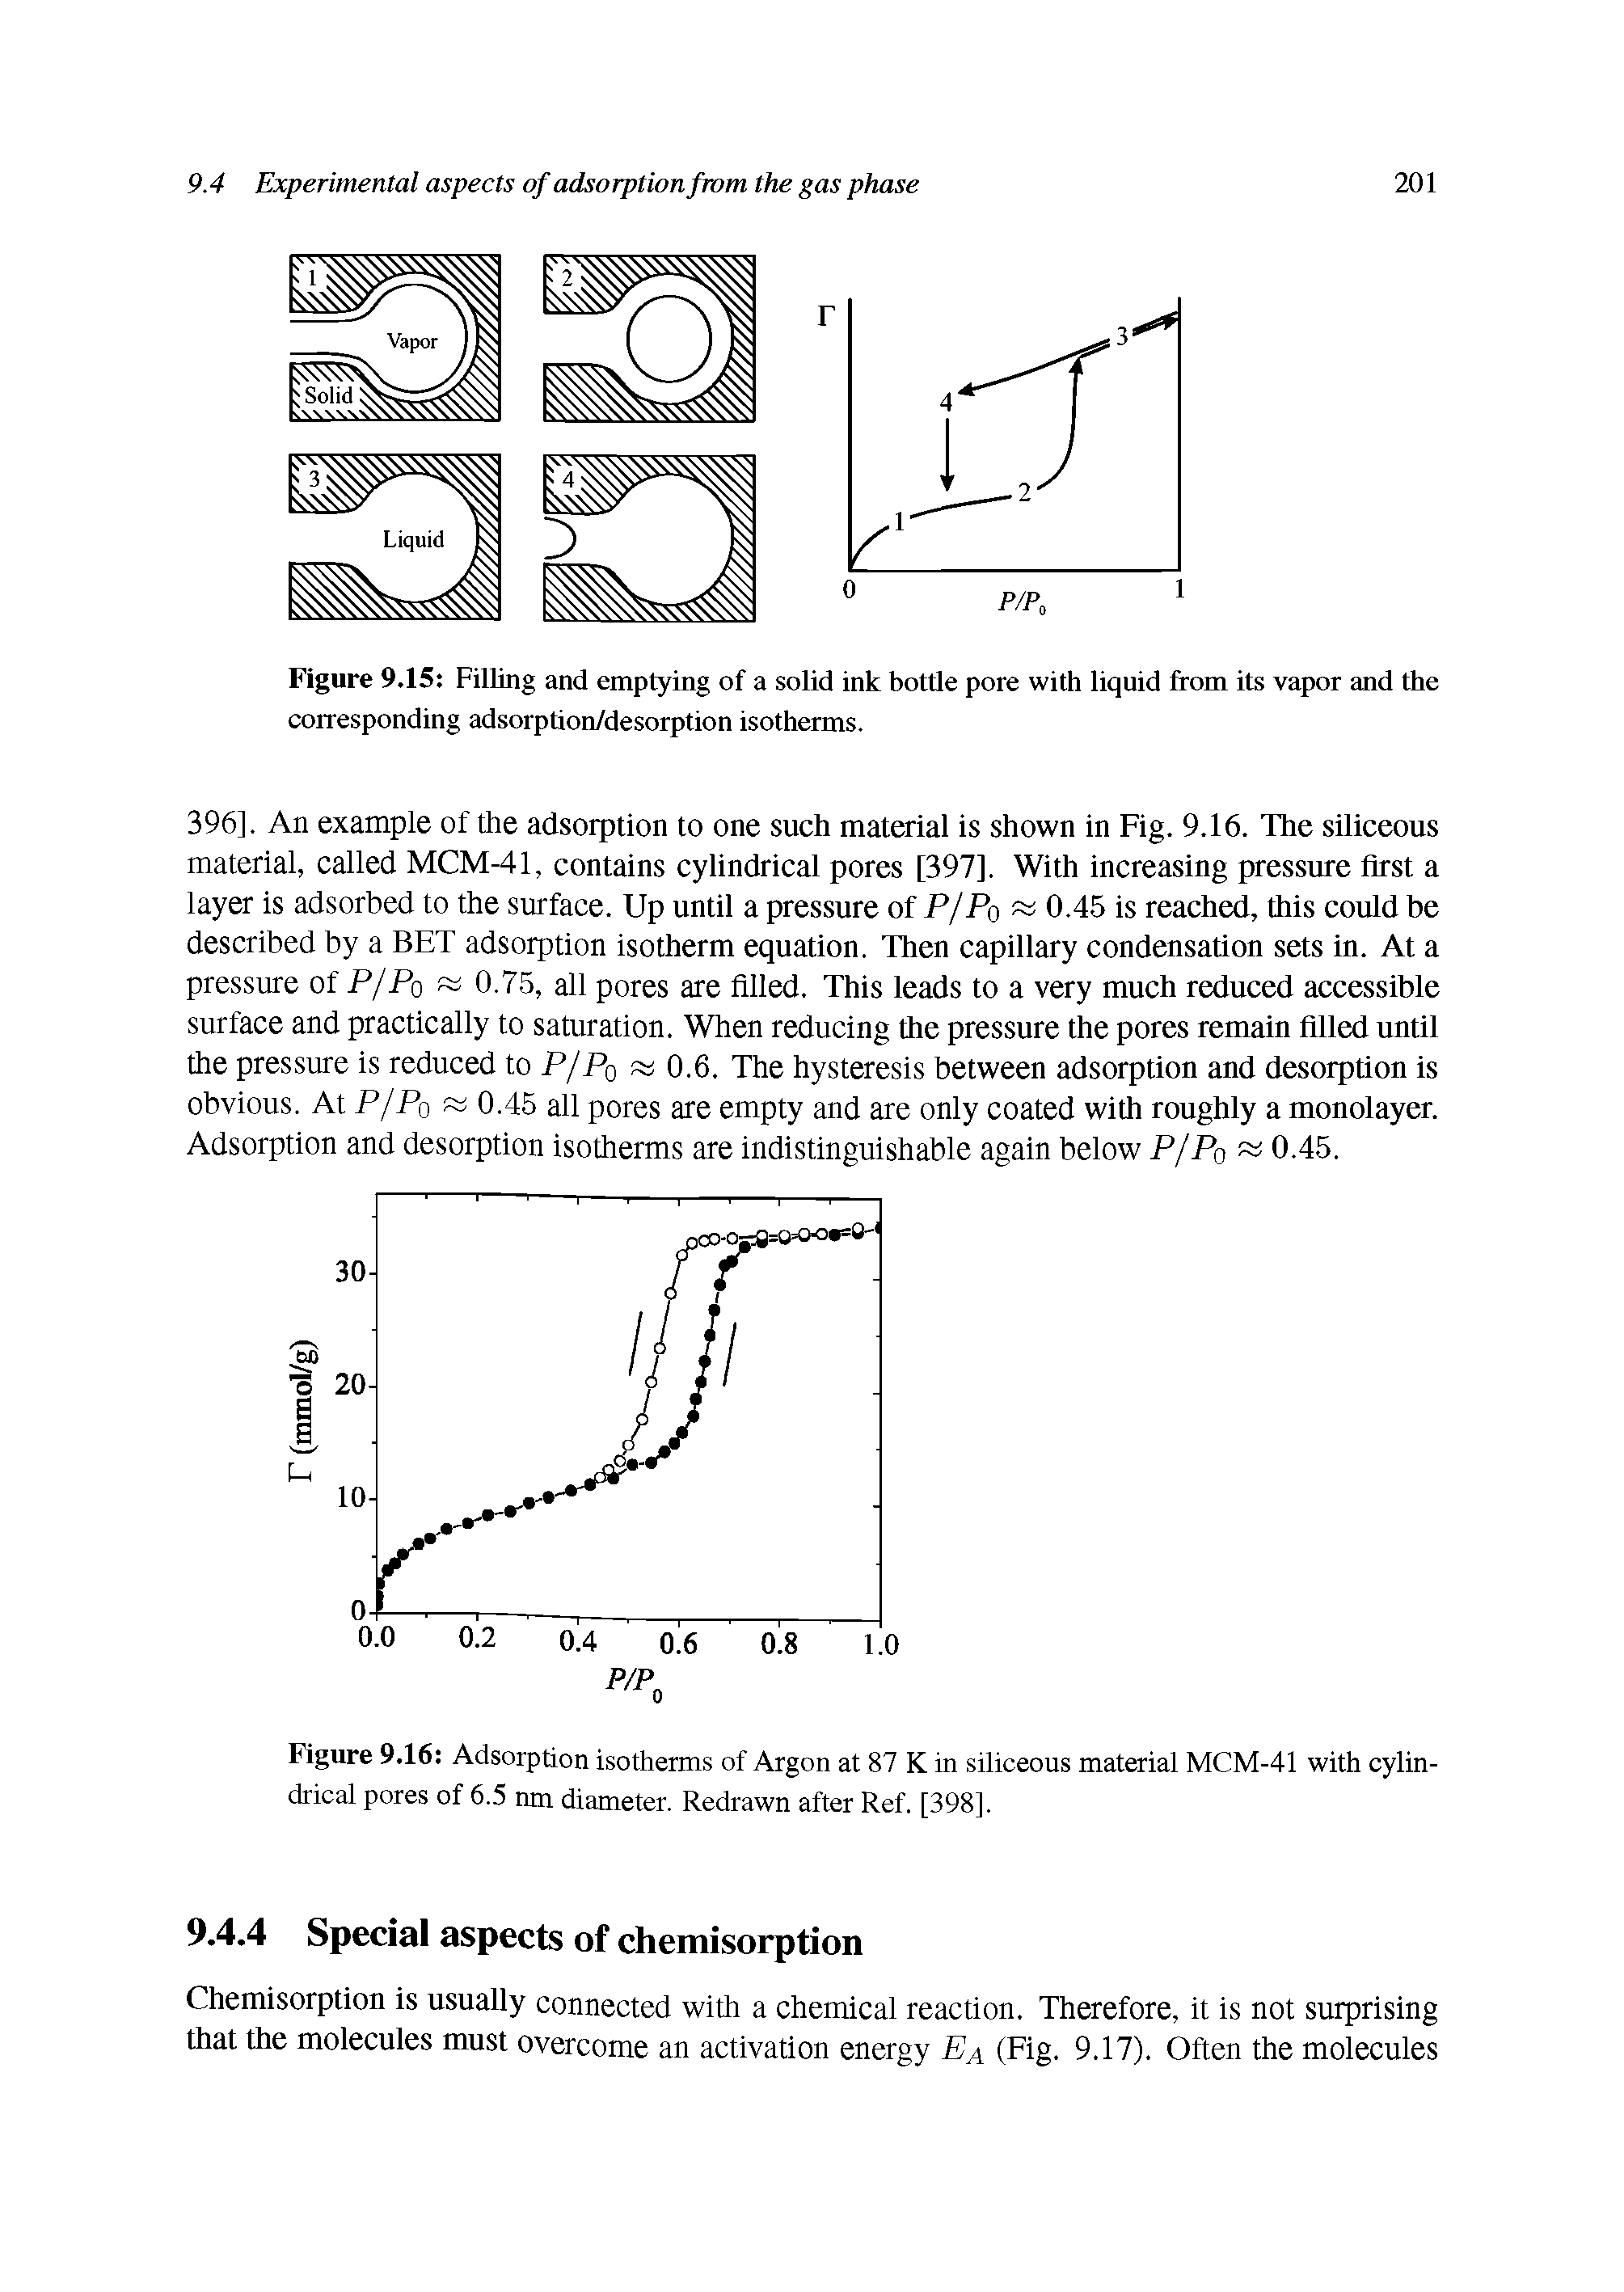 Figure 9.15 Filling and emptying of a solid ink bottle pore with liquid from its vapor and the corresponding adsorption/desorption isotherms.